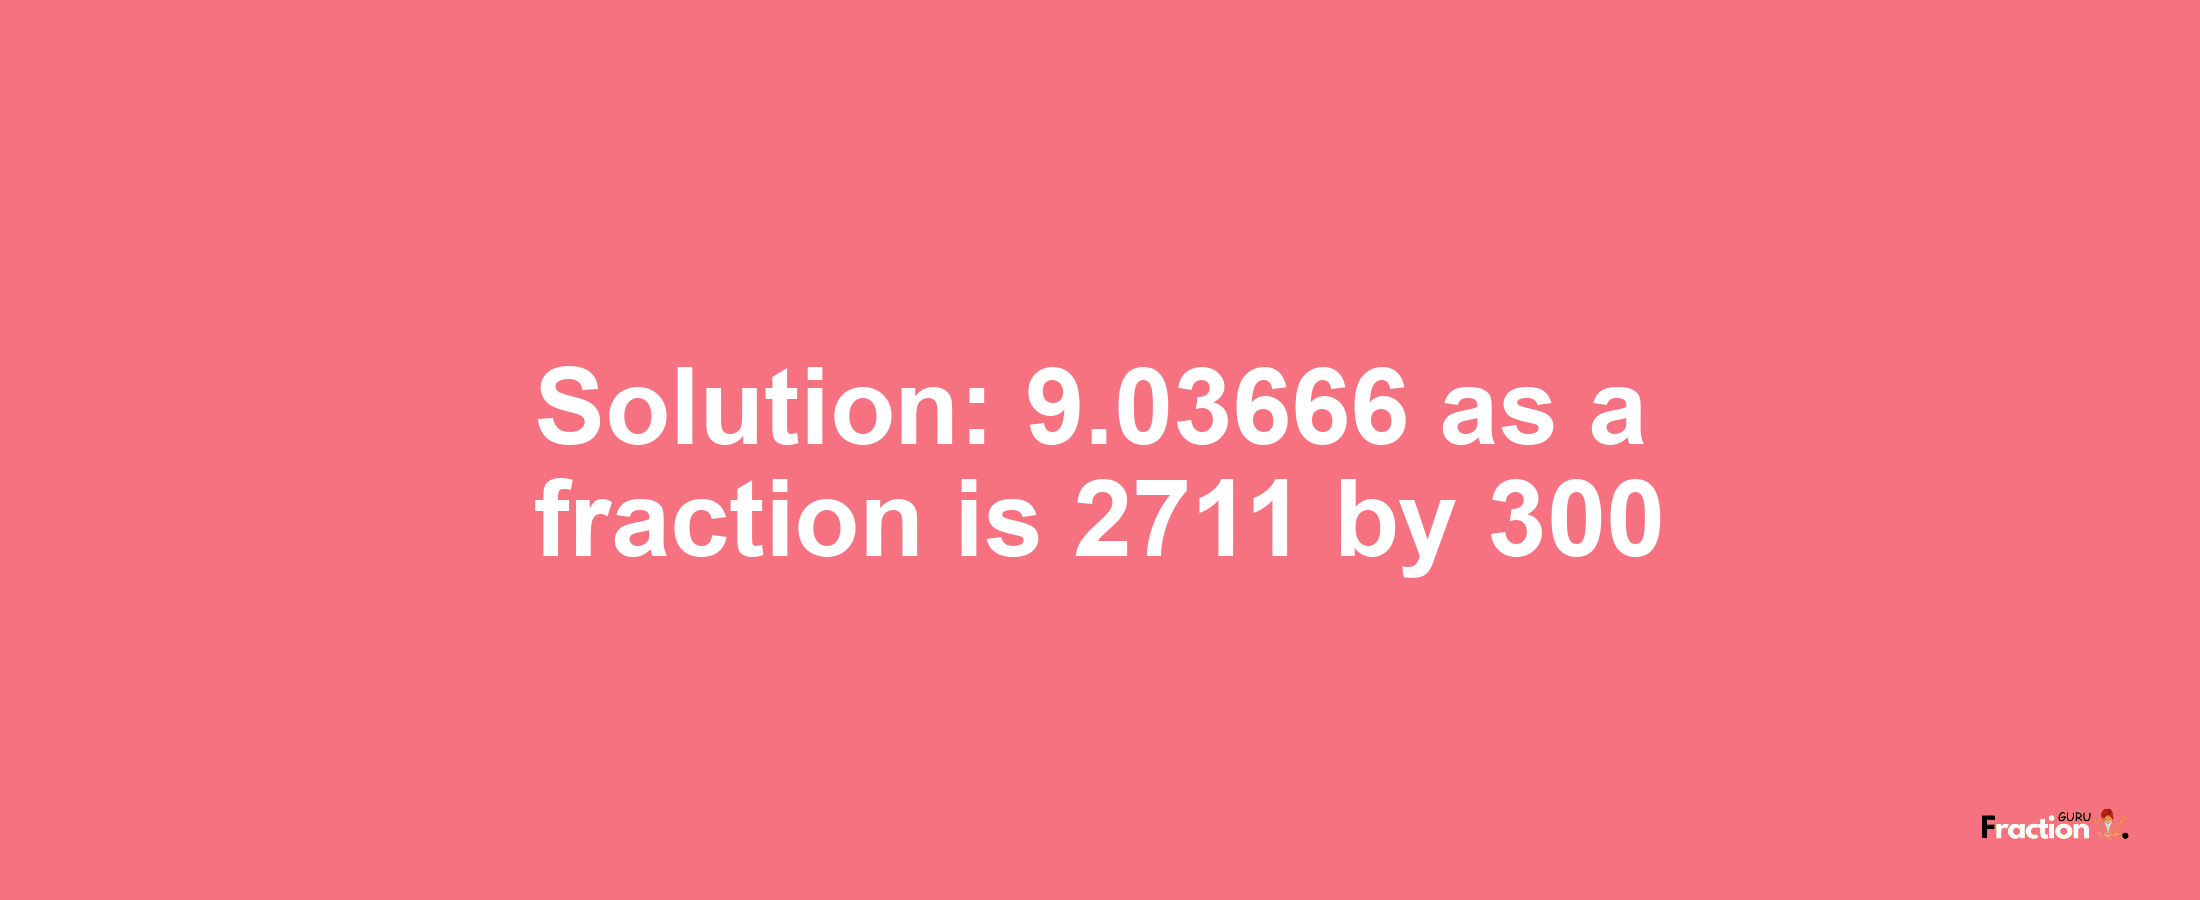 Solution:9.03666 as a fraction is 2711/300